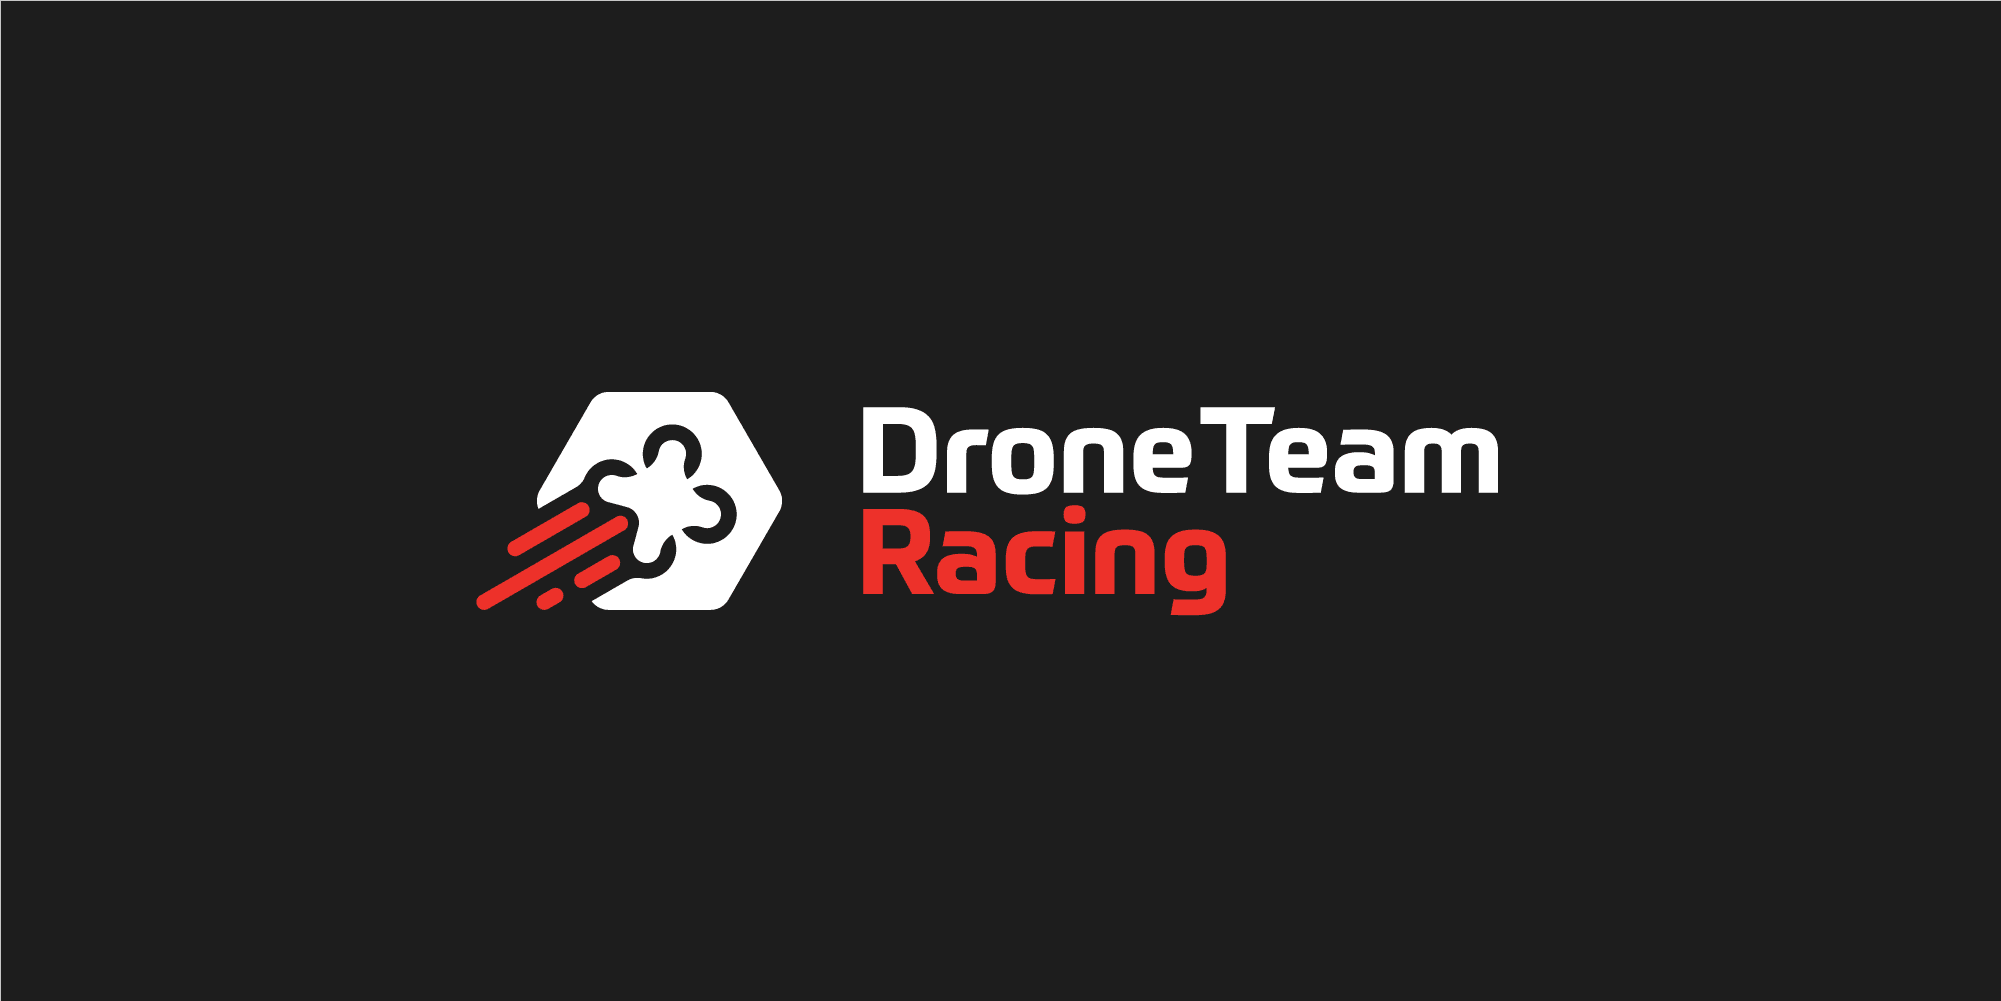 Do you want to race FPV drones?